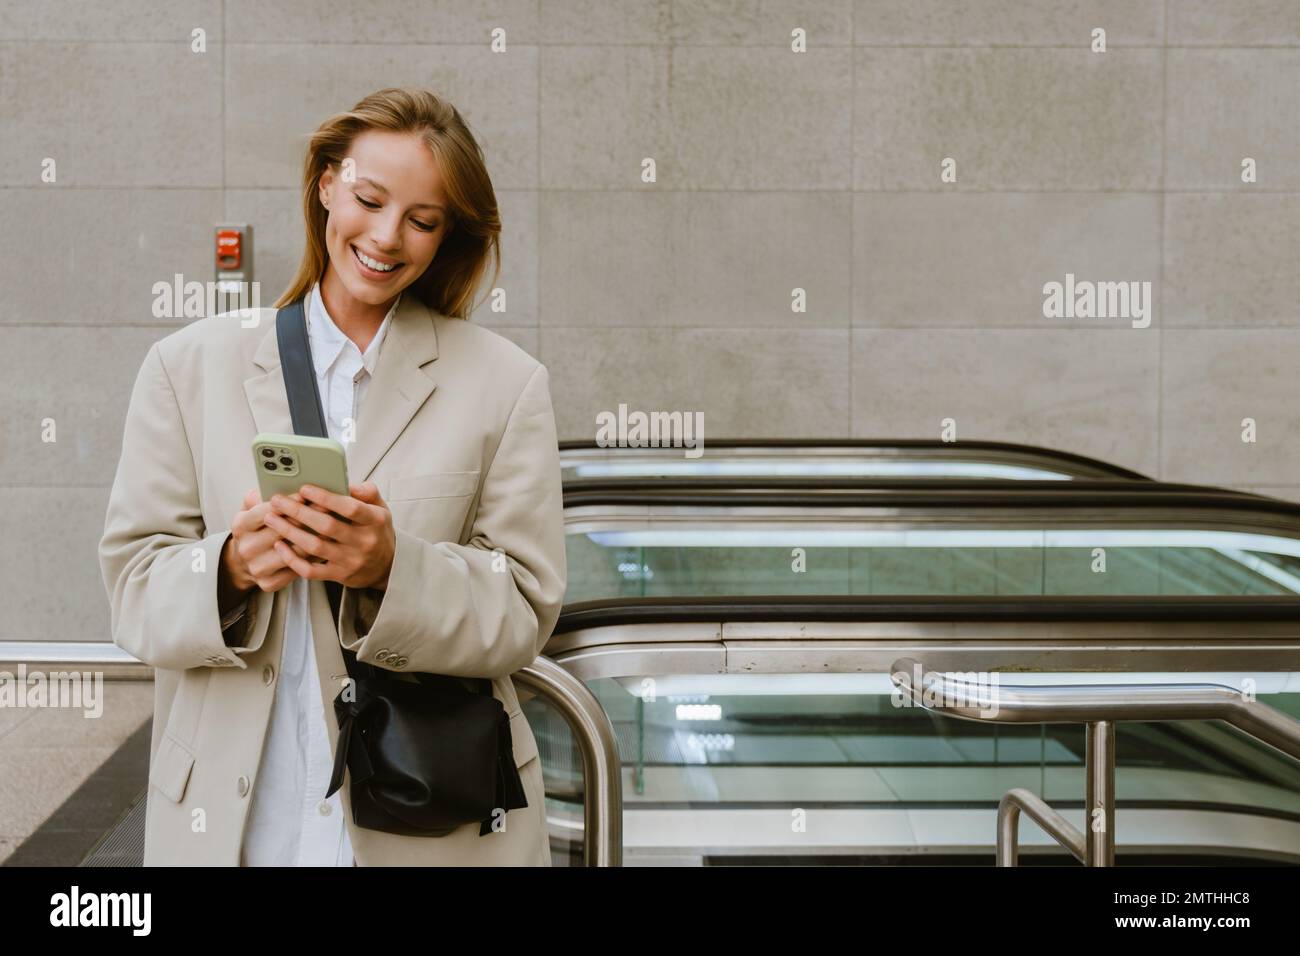 Young white woman smiling and using cellphone while standing by escalator outdoors Stock Photo